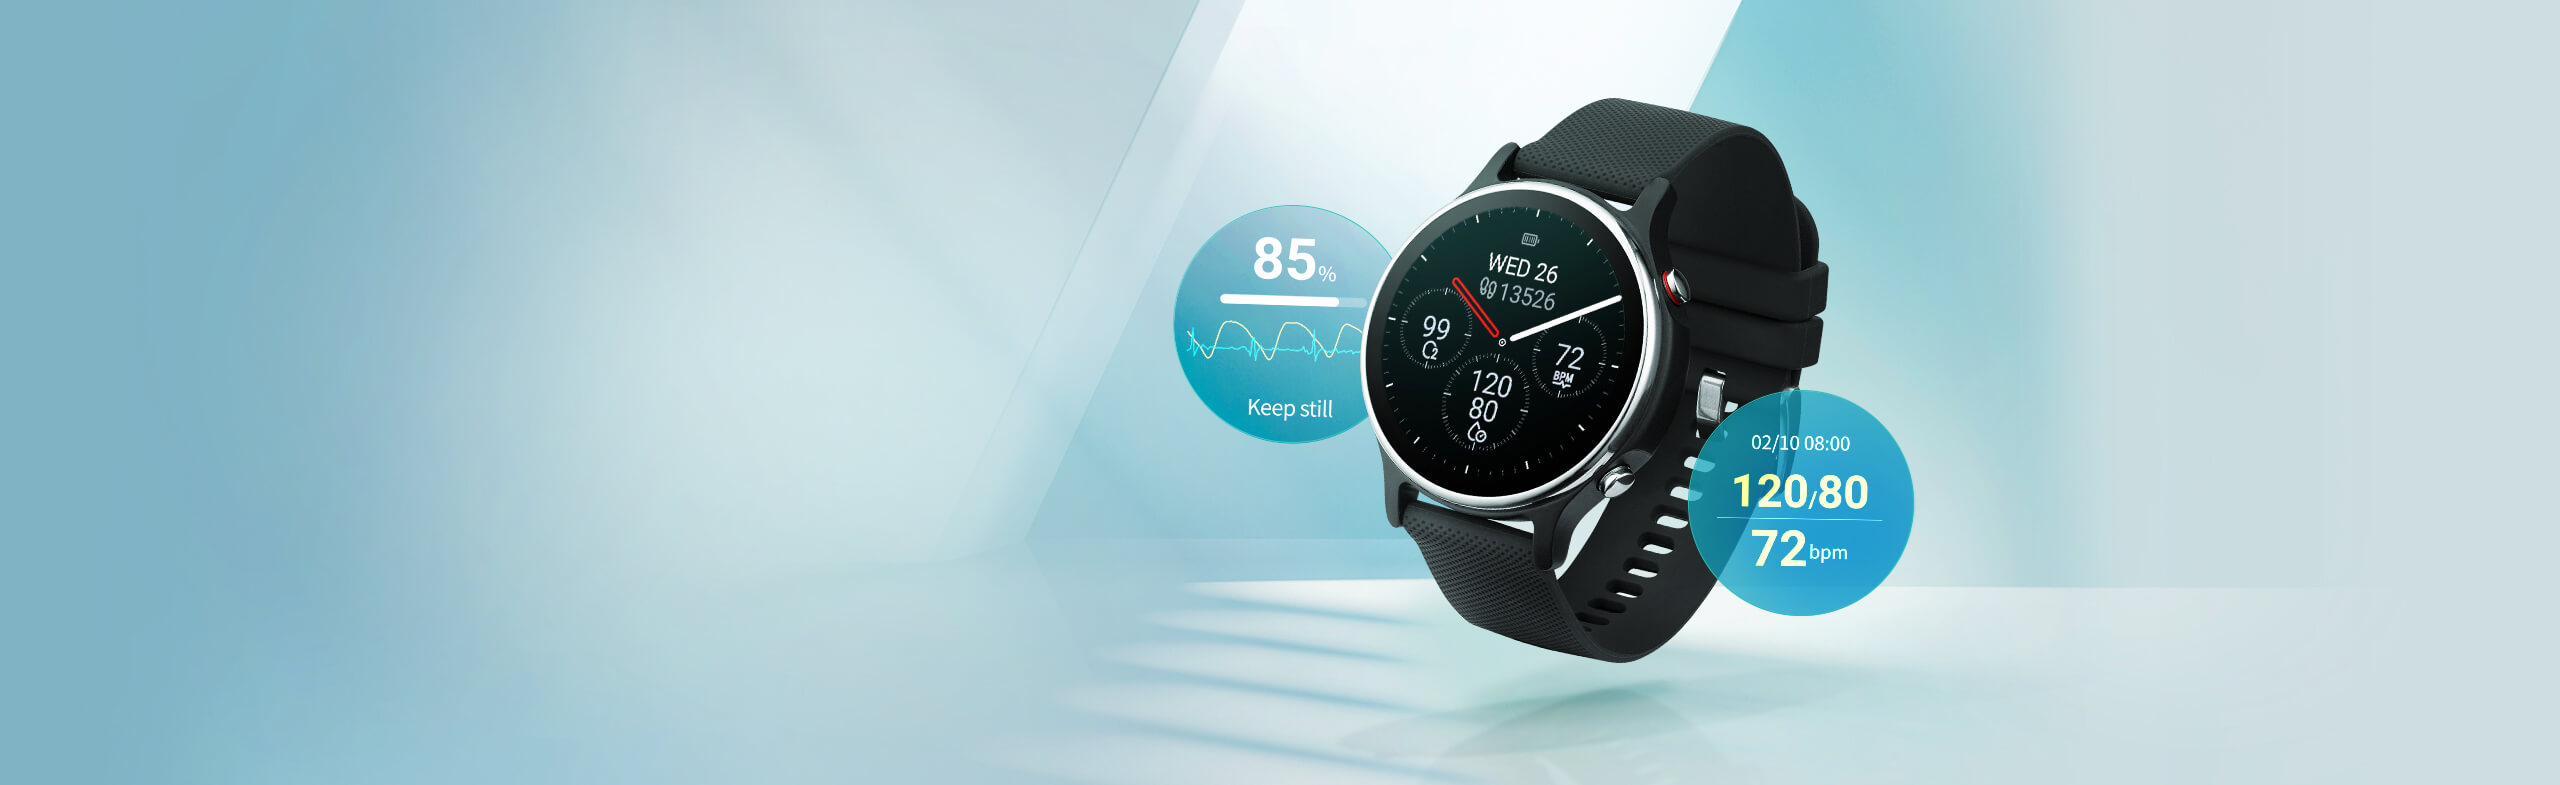 ASUS VivoWatch 6 product with a blue background, displaying time and blood pressure data